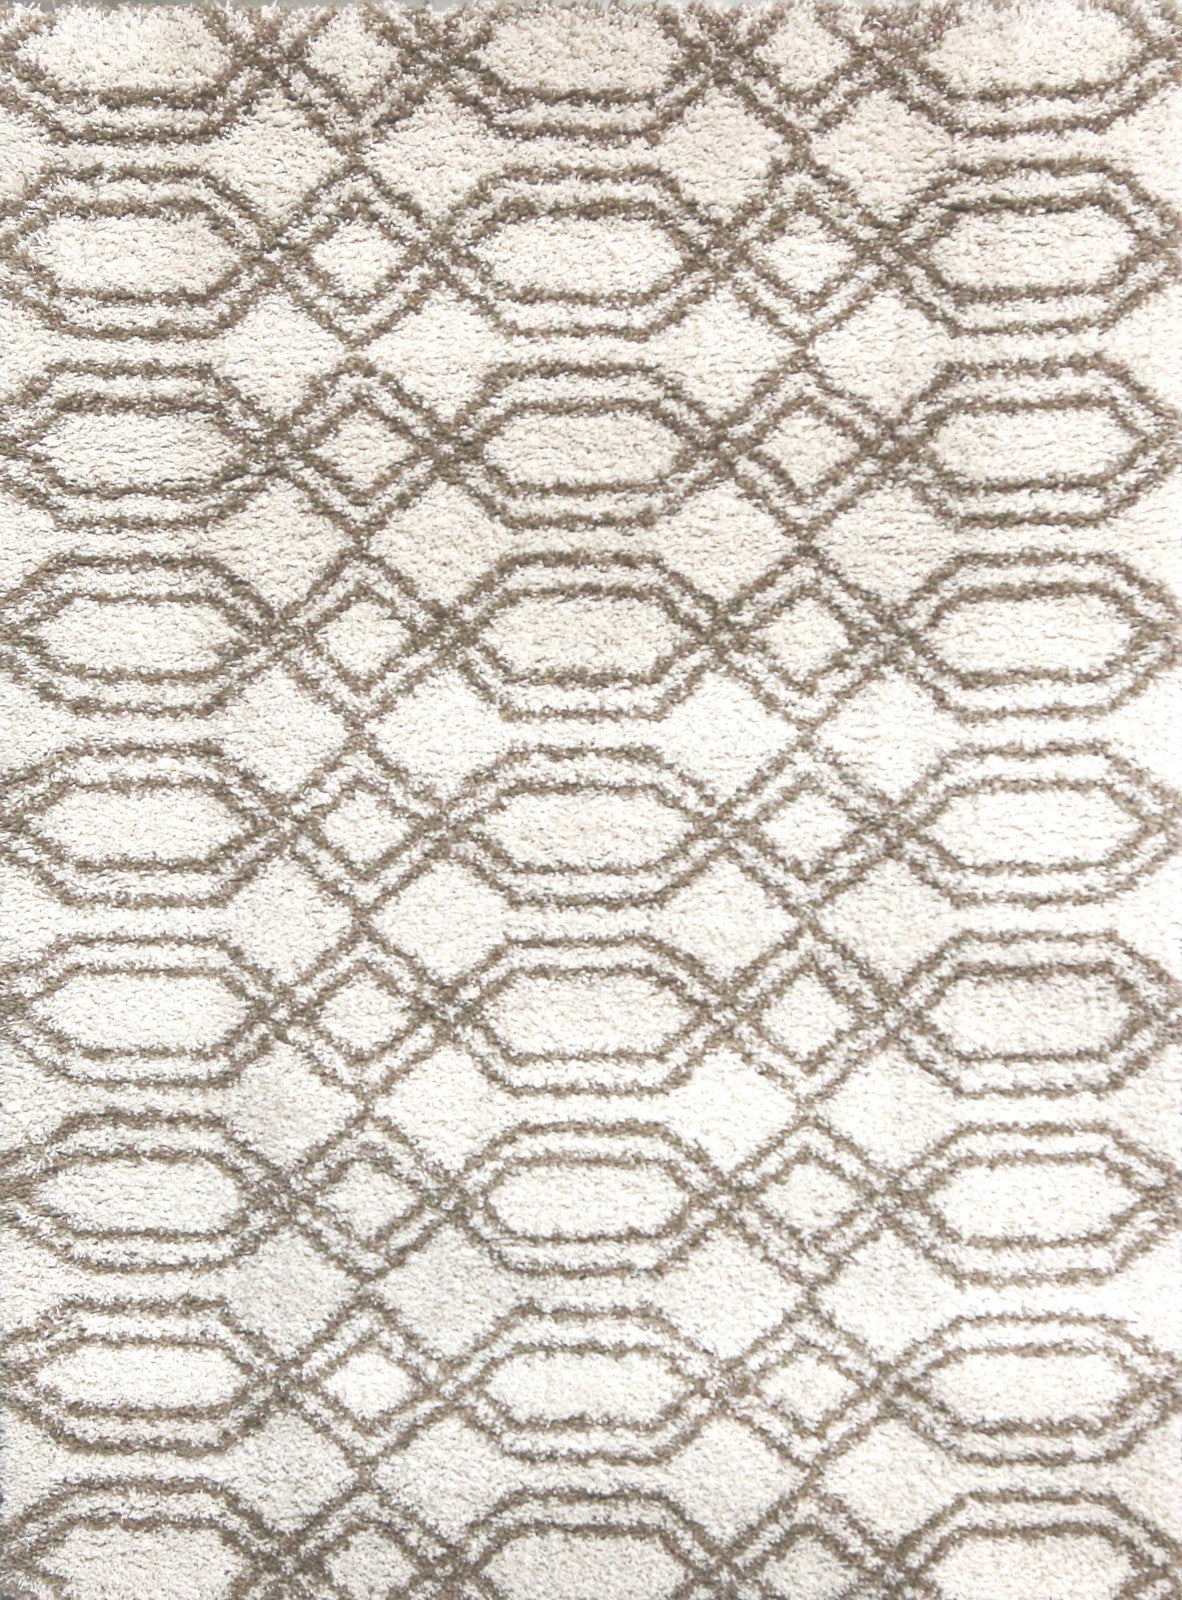 Dynamic Rugs Passion 6202 Ivory Area Rug main image